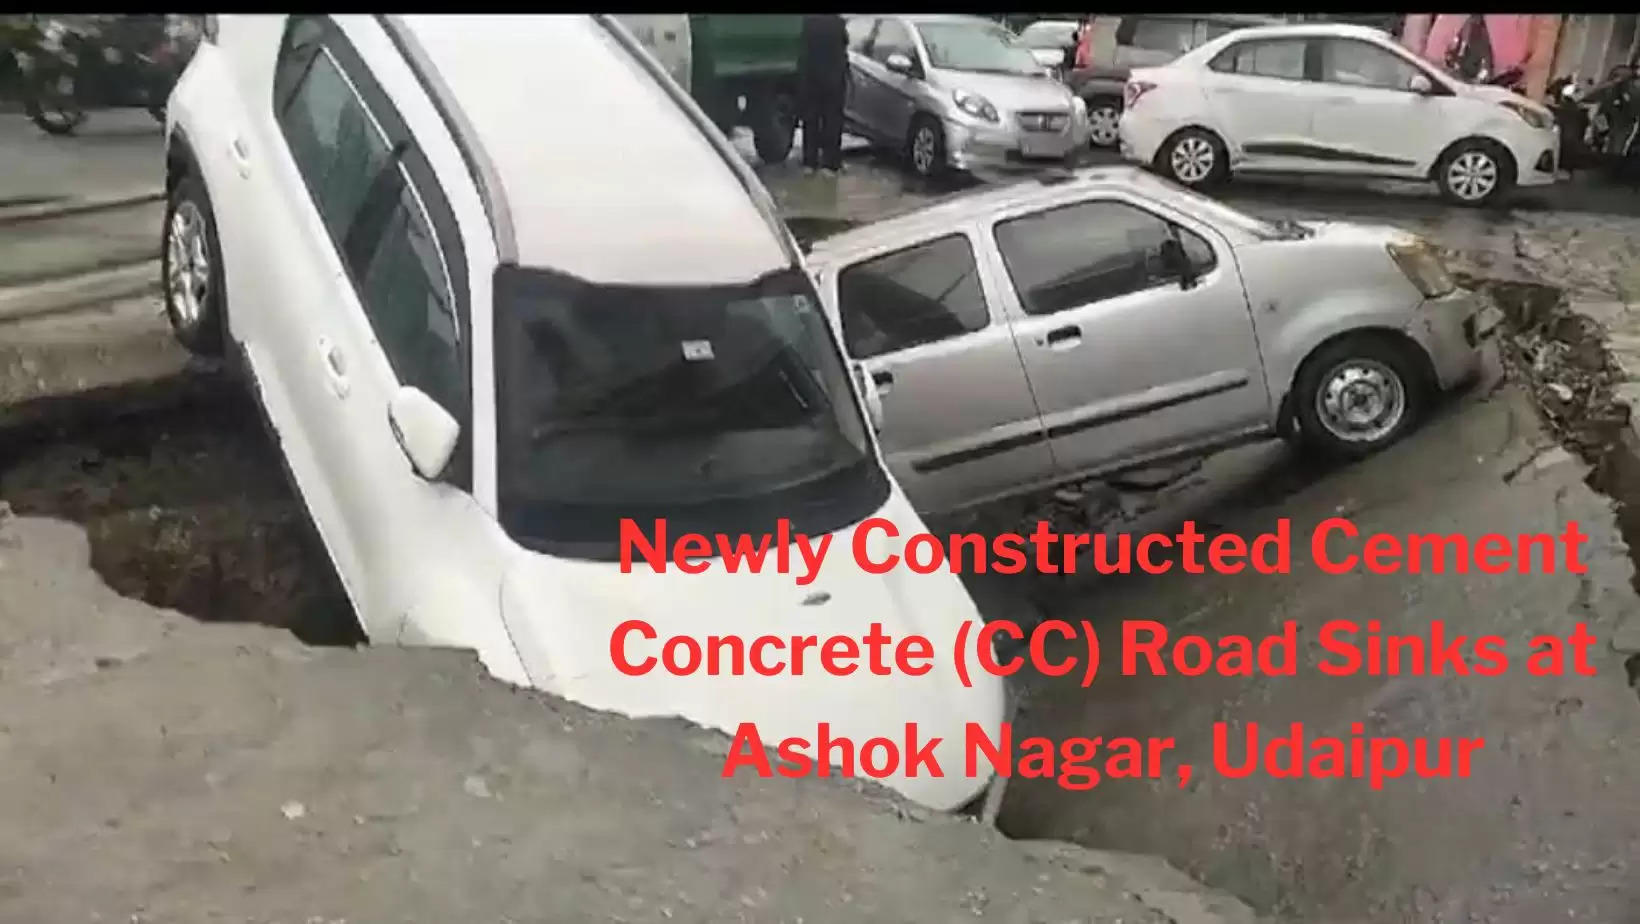 Cars fall in drain as cement concrete road sinks at Ashok Nagar Udaipur, Udaipur Smart City Work Exposed